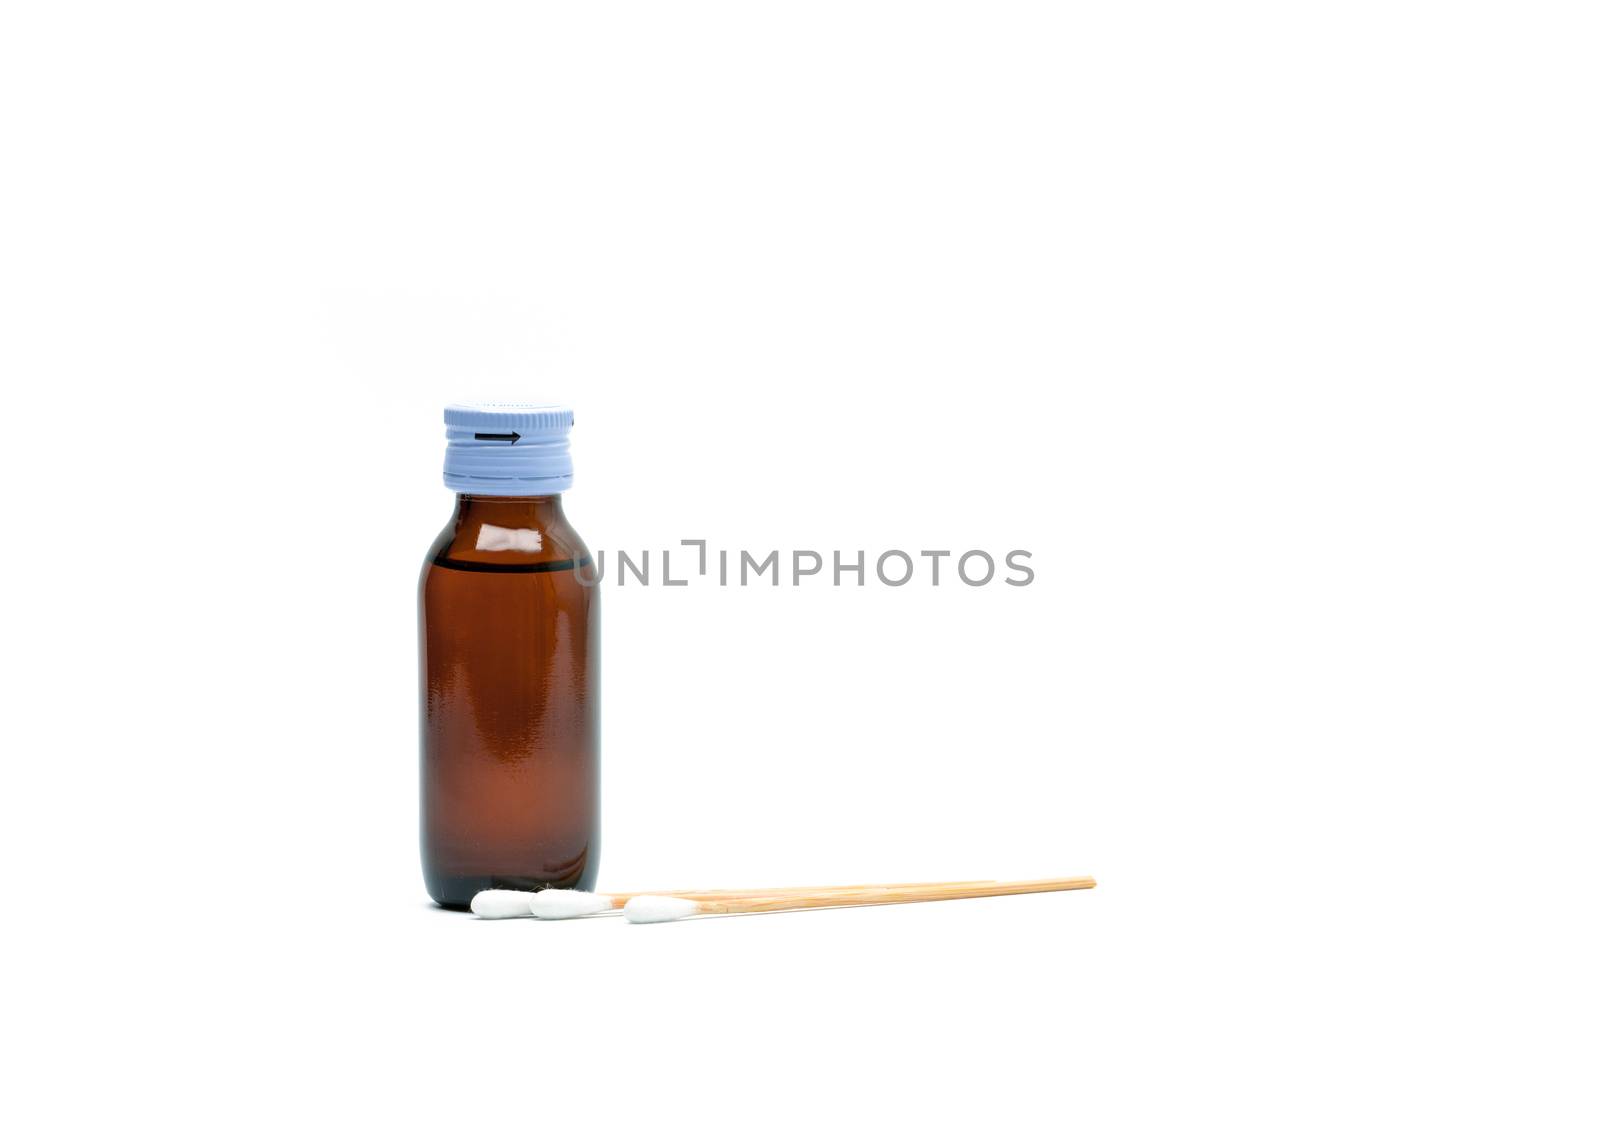 Cotton sticks and antiseptic solutions in amber glass bottle isolated on white background. Concept of Umbilical cord care for helps prevent infection. Infant's umbilical cord cleaning care equipment.